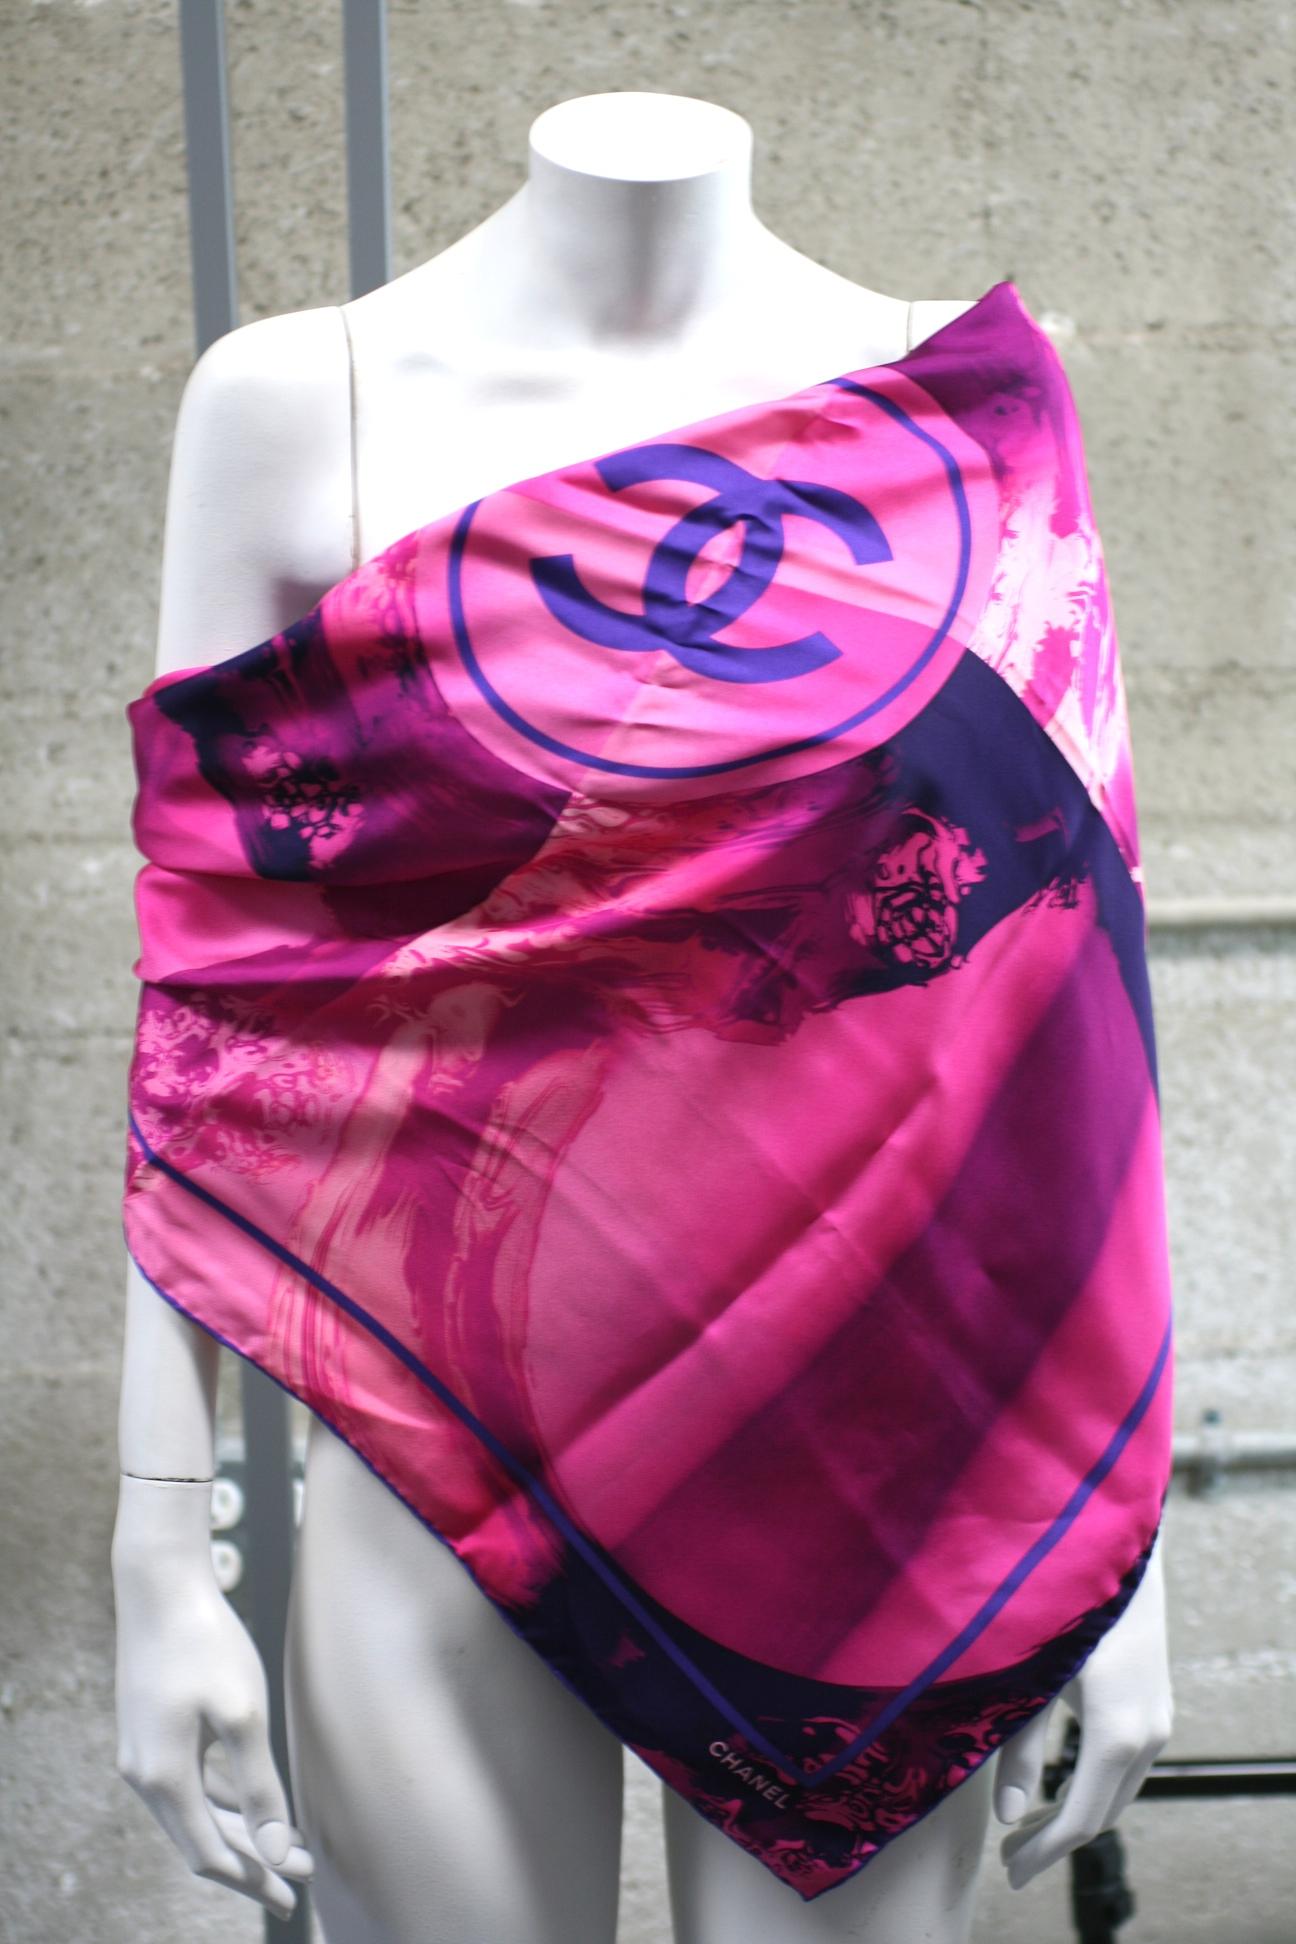 Chanel Watercolor Logo Scarf in shades of hot pinks and purples. Abstract waves swirl and splash around the central logo in silk twill. 
Excellent condition, 34